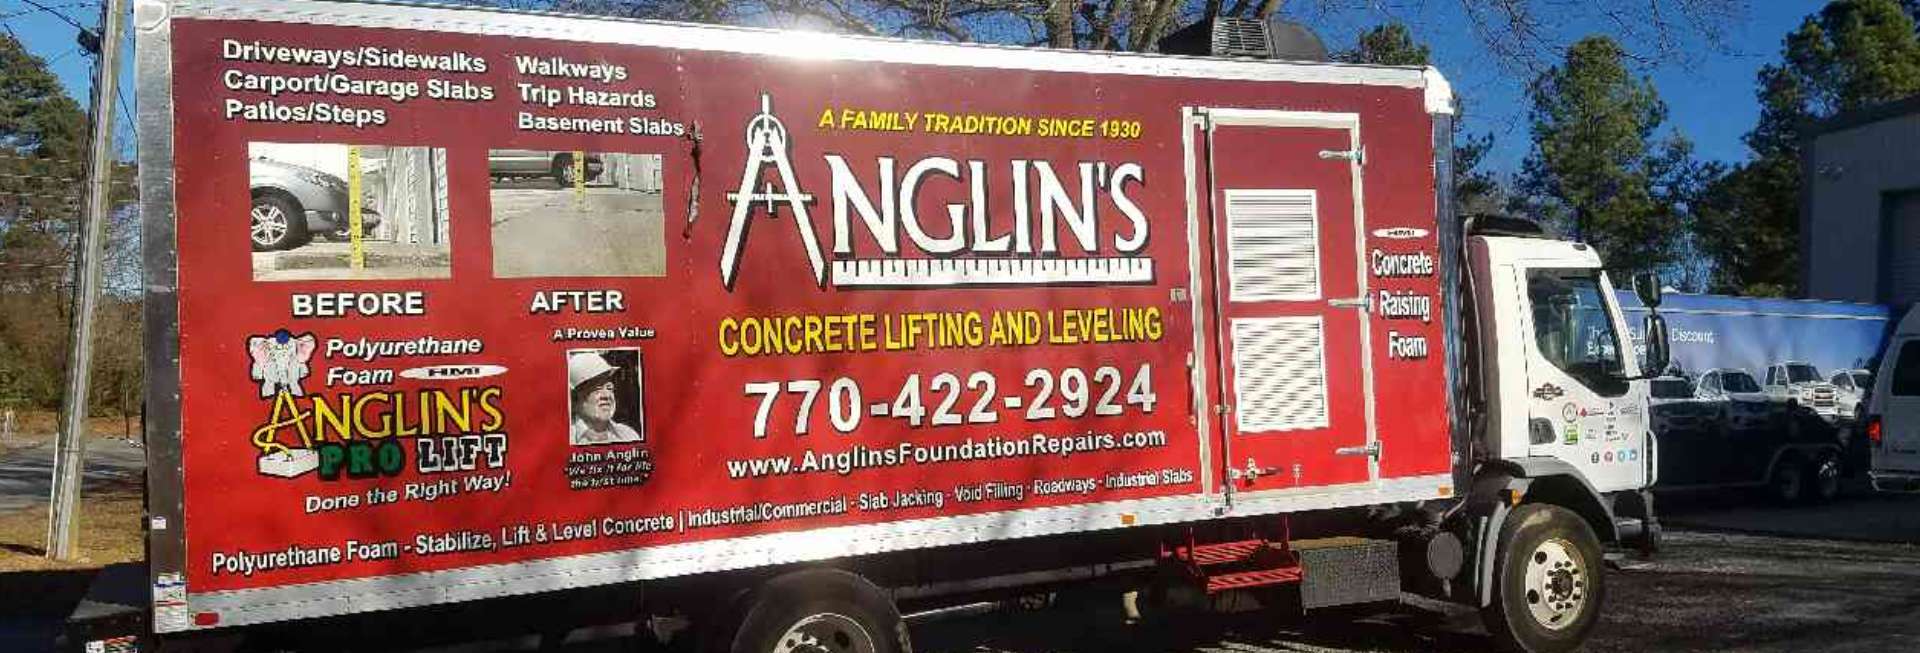 anglins truck